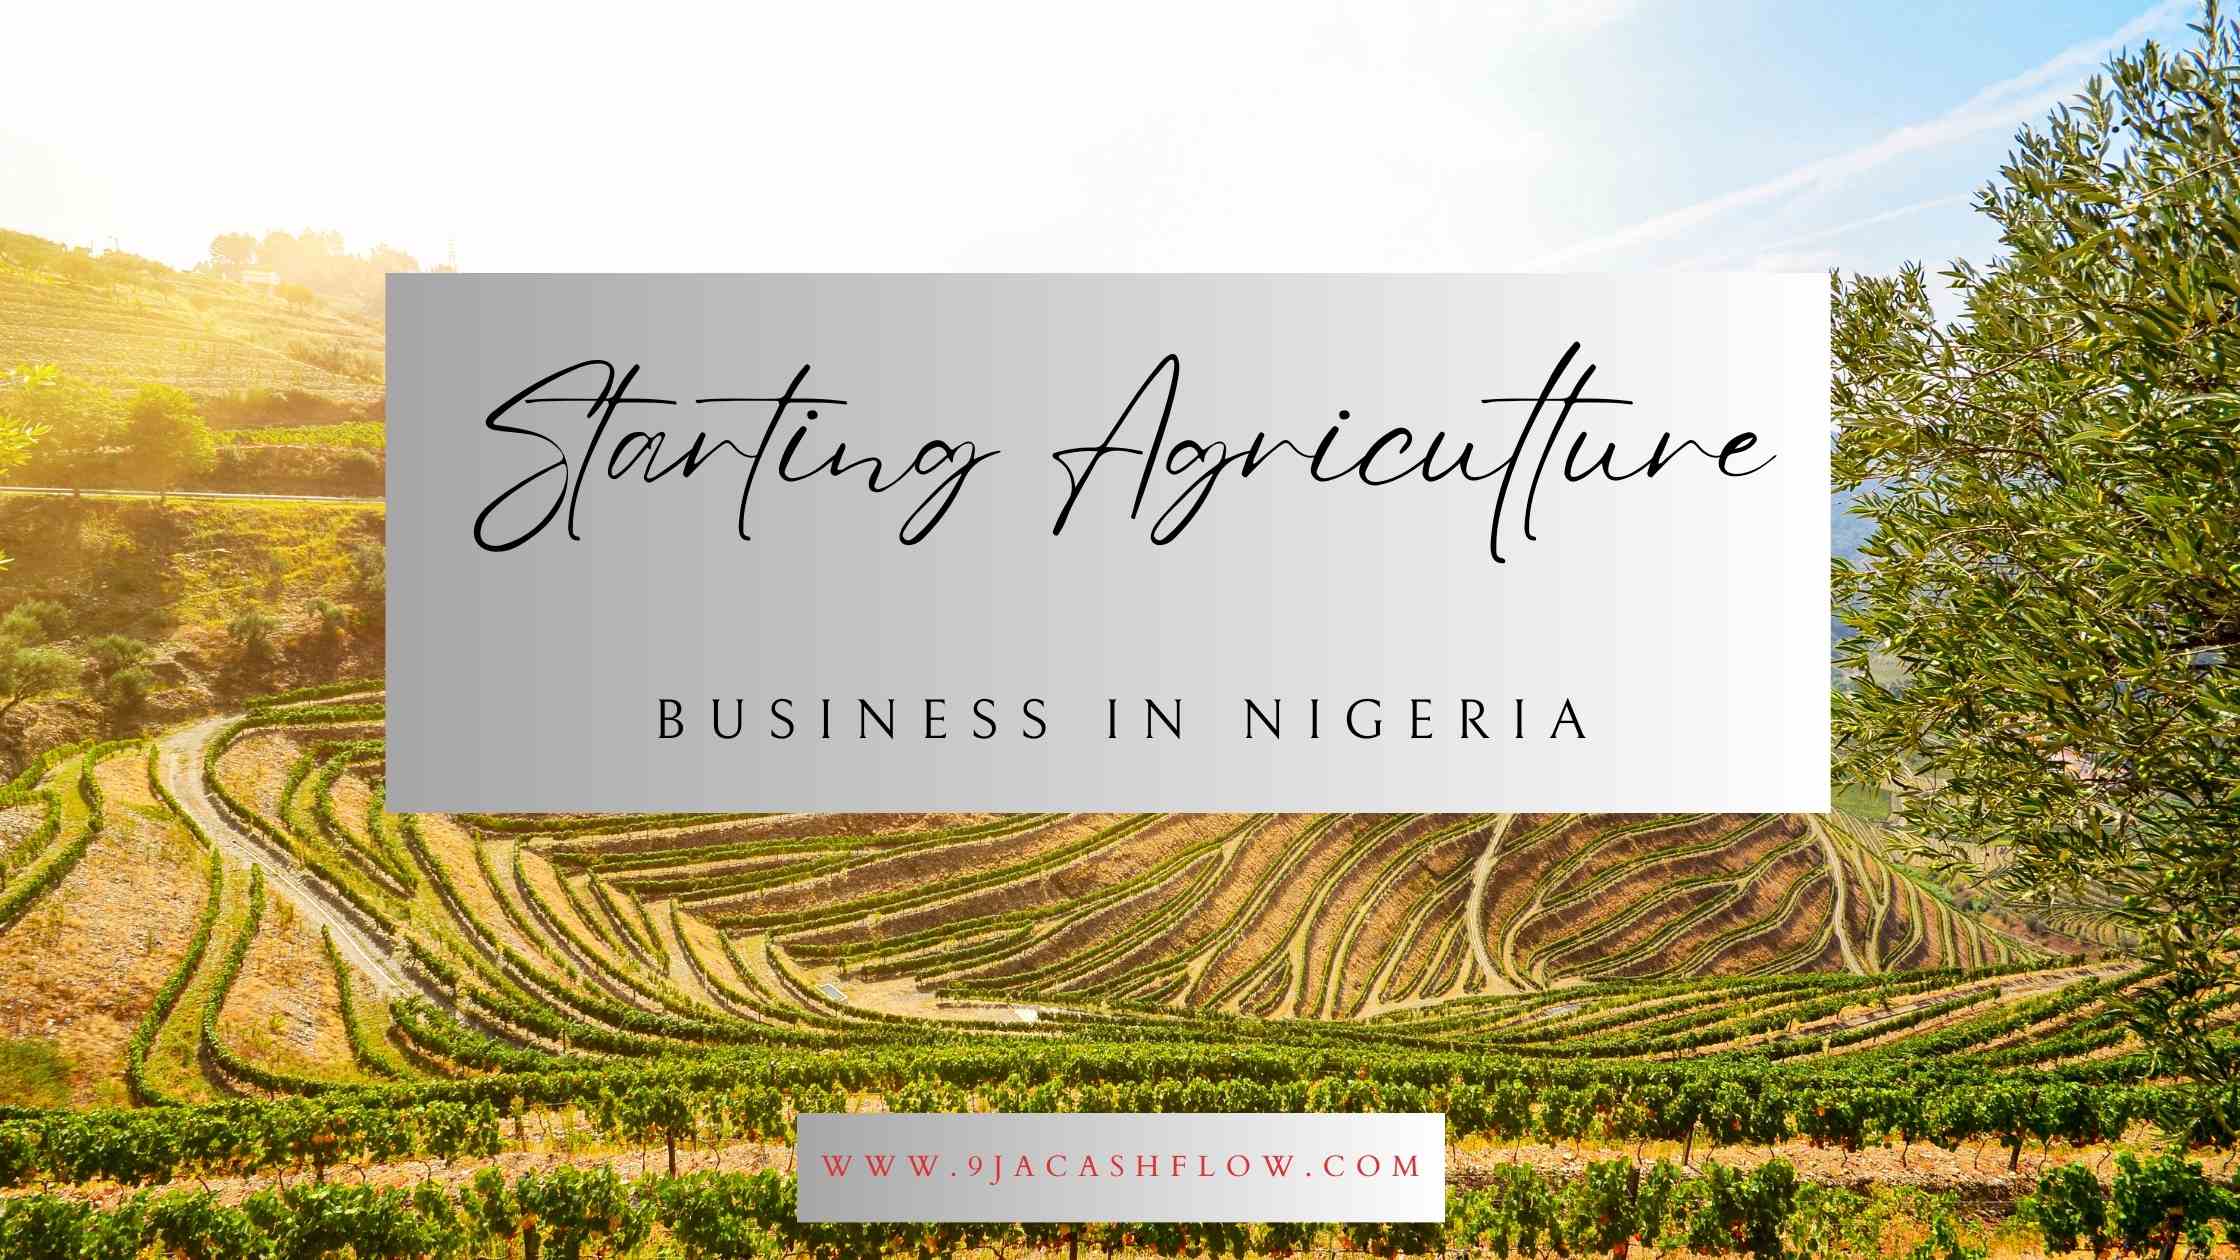 What You Must Know About Starting A Farming or Agriculture Business in Nigeria